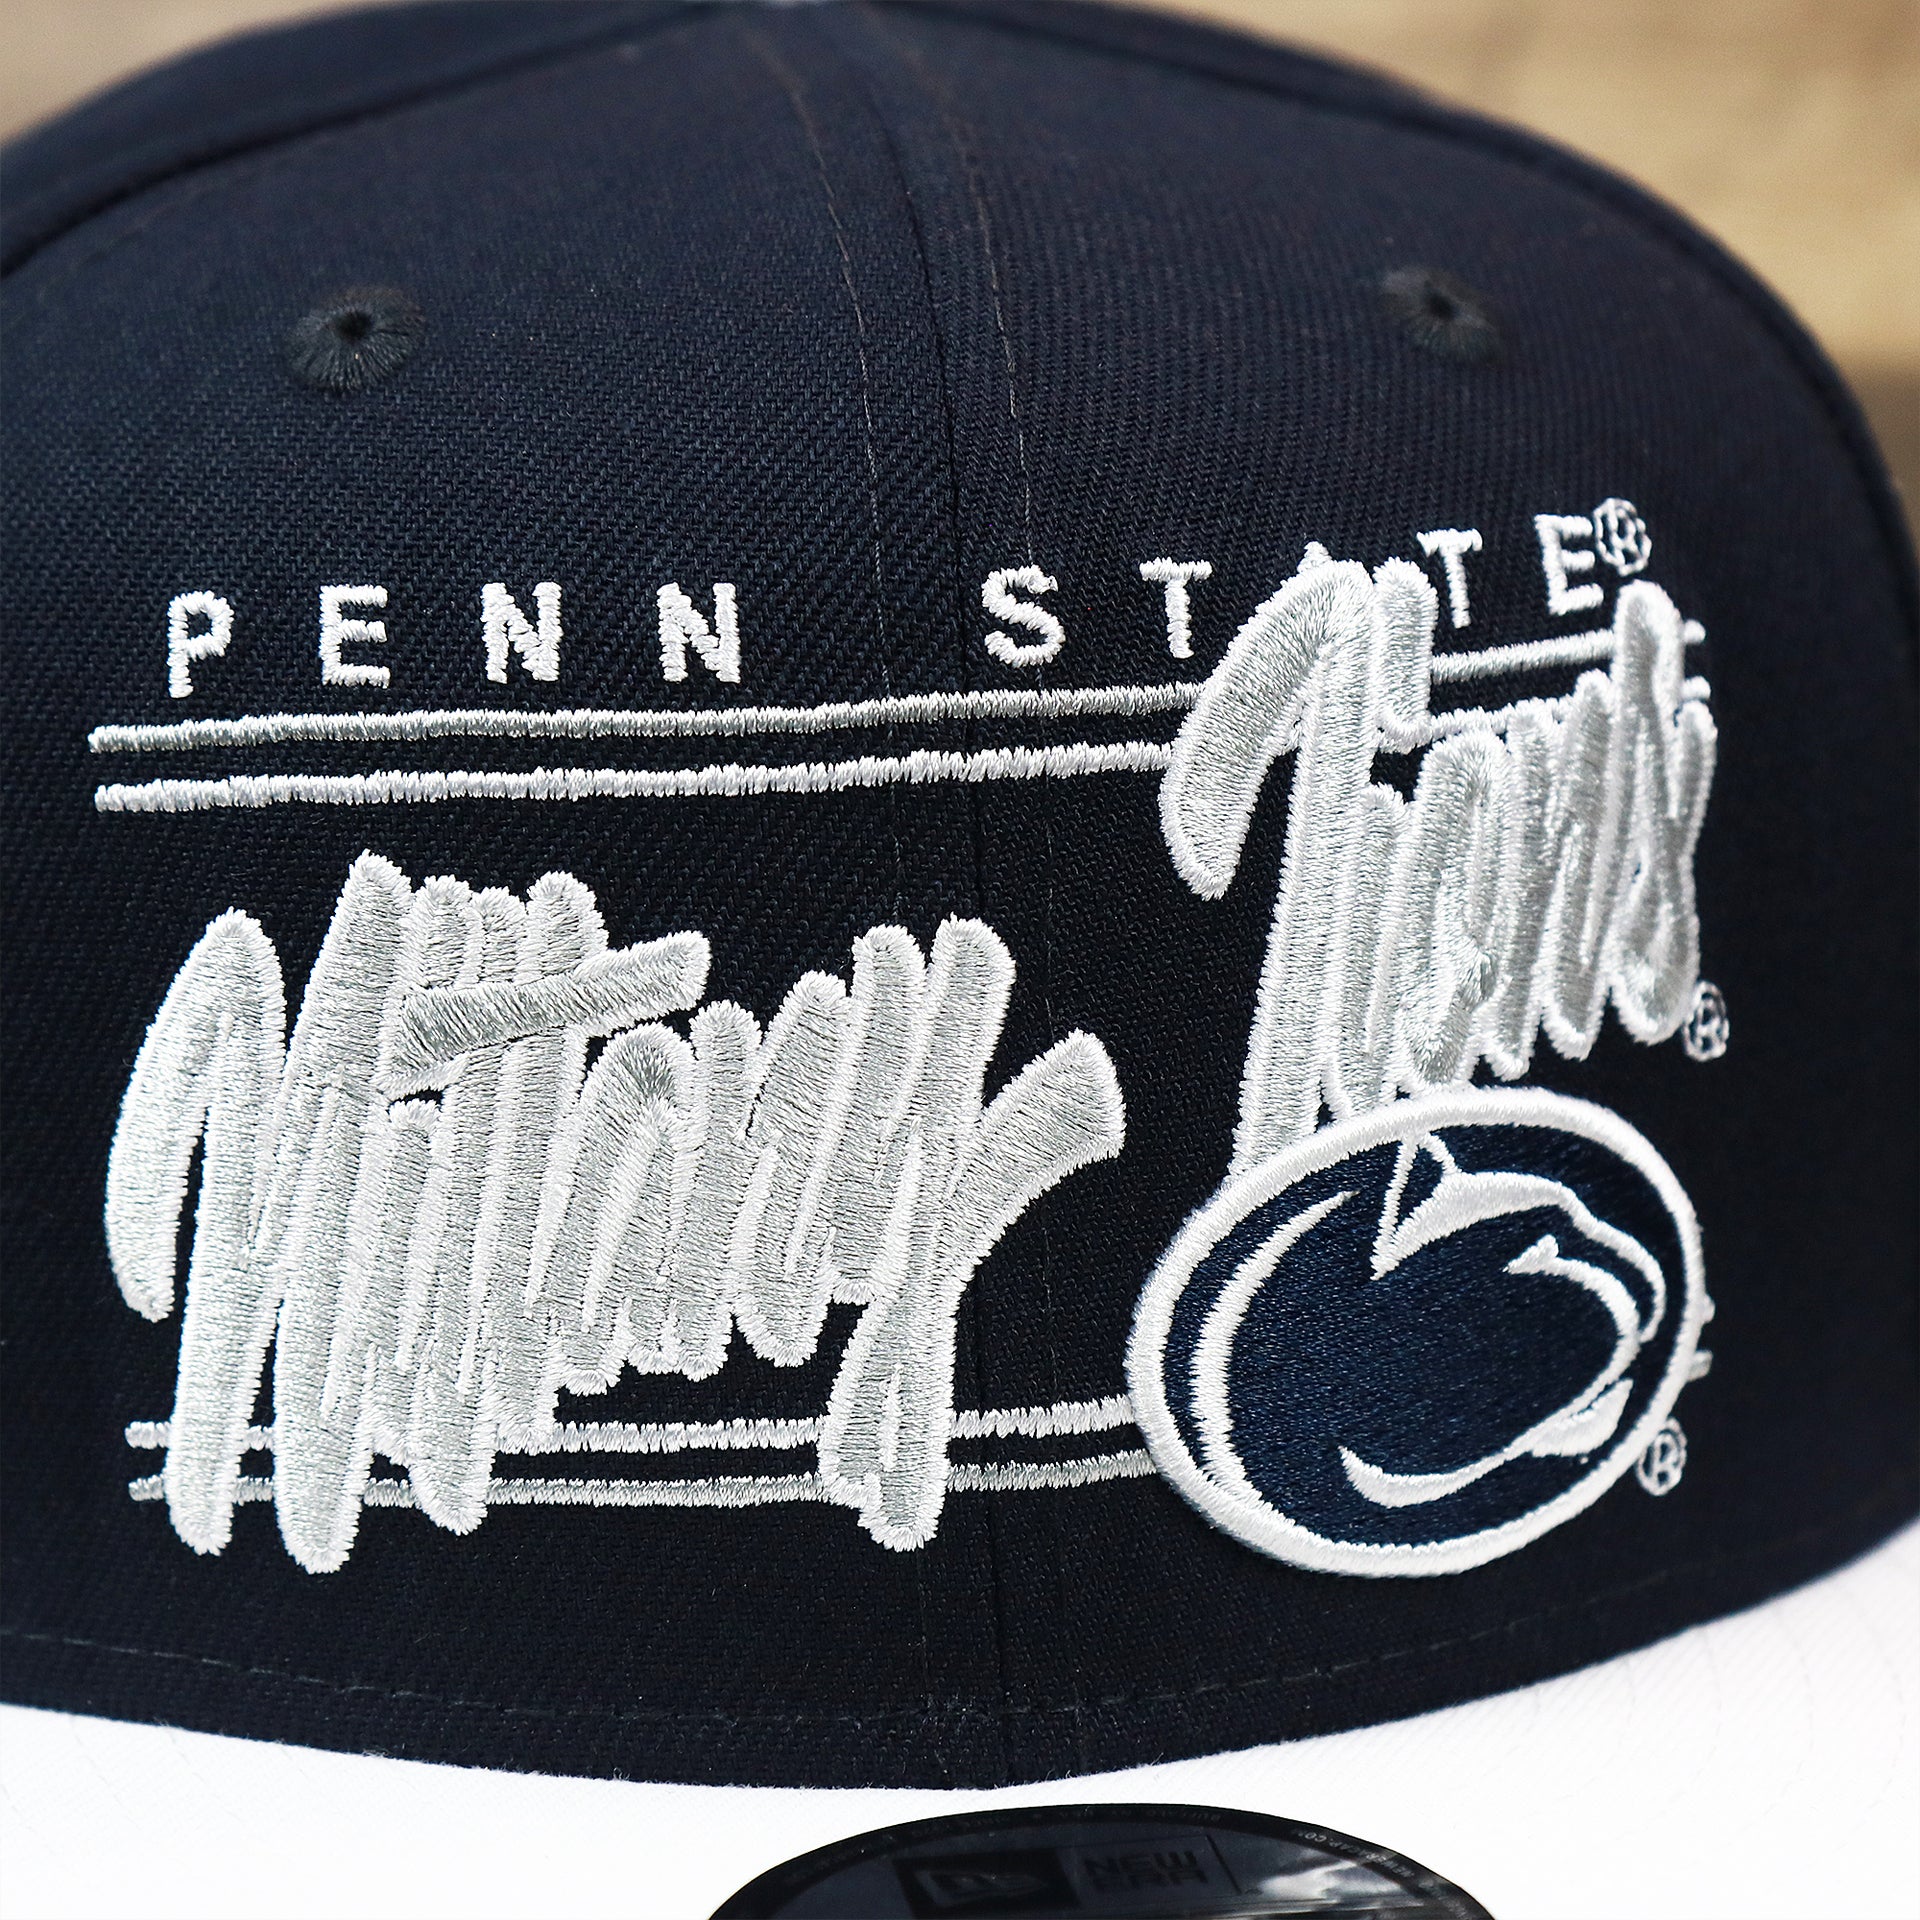 The Nittany Lions Team Script on the Penn State Nittany Lions Team Script Gray Bottom 9Fifty Snapback | Navy Blue And White Snap Cap